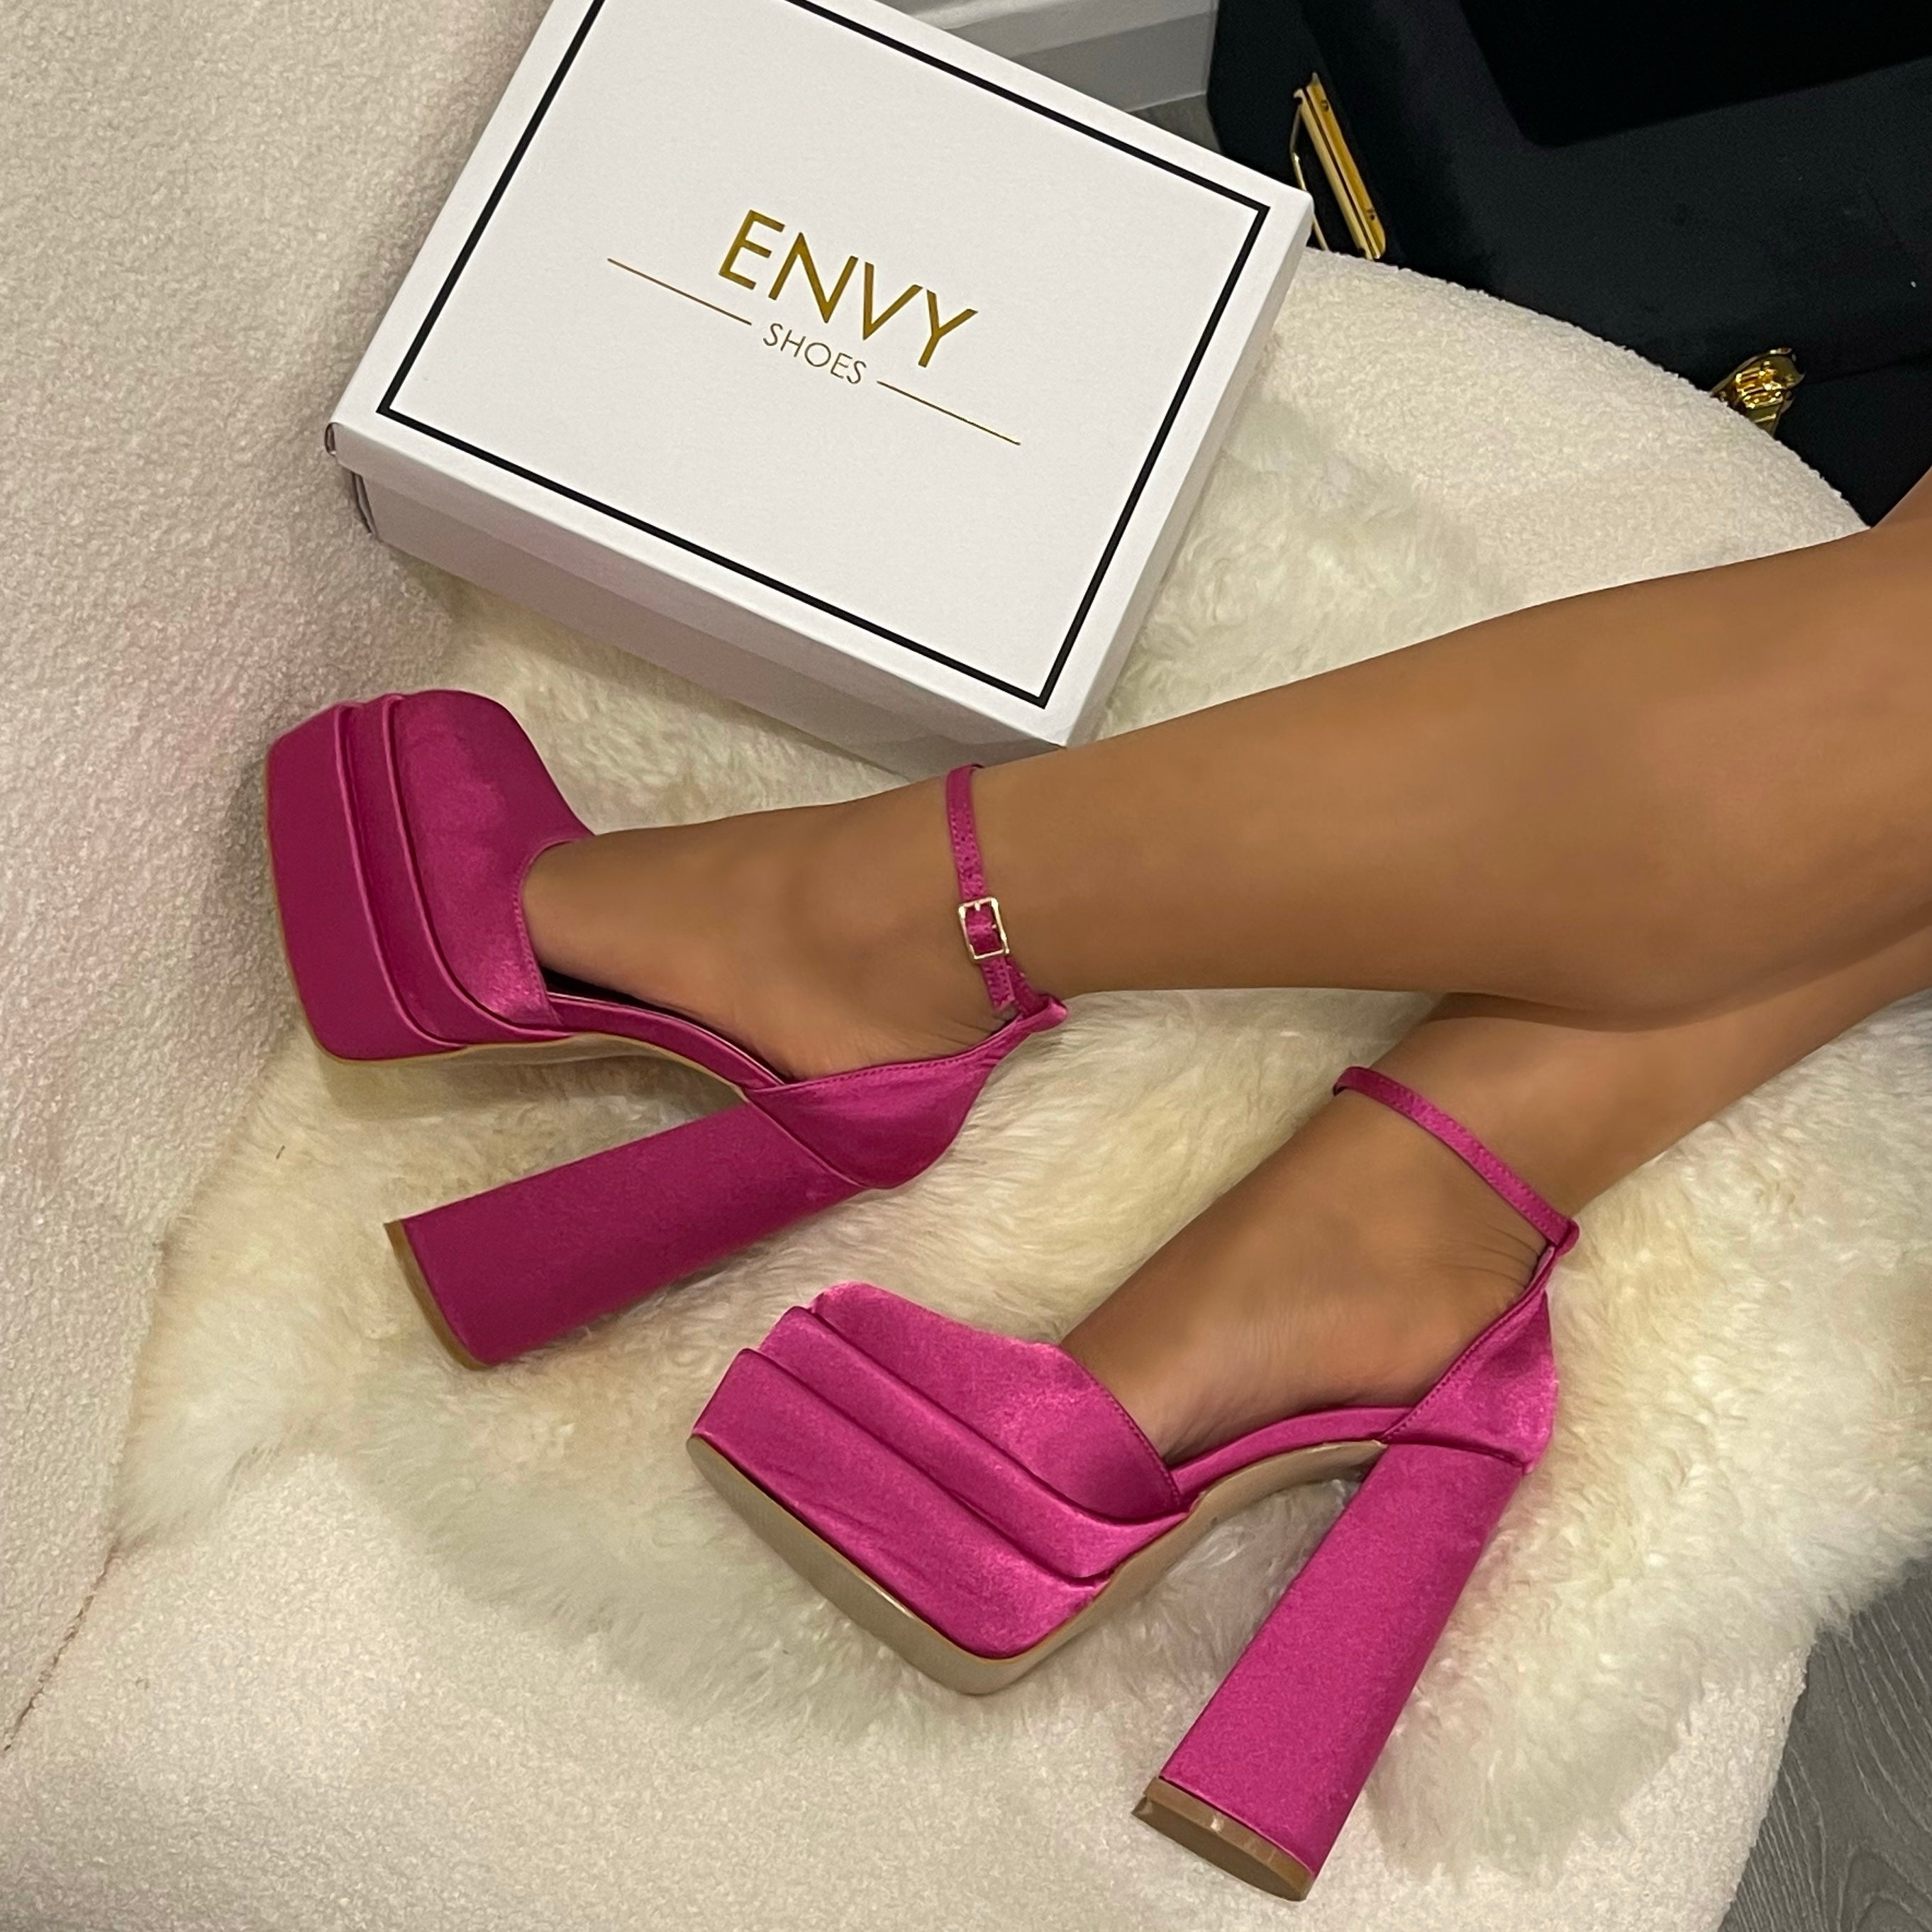 Envy Shoes UK - The slides everyone needs 😍 The Didi nude